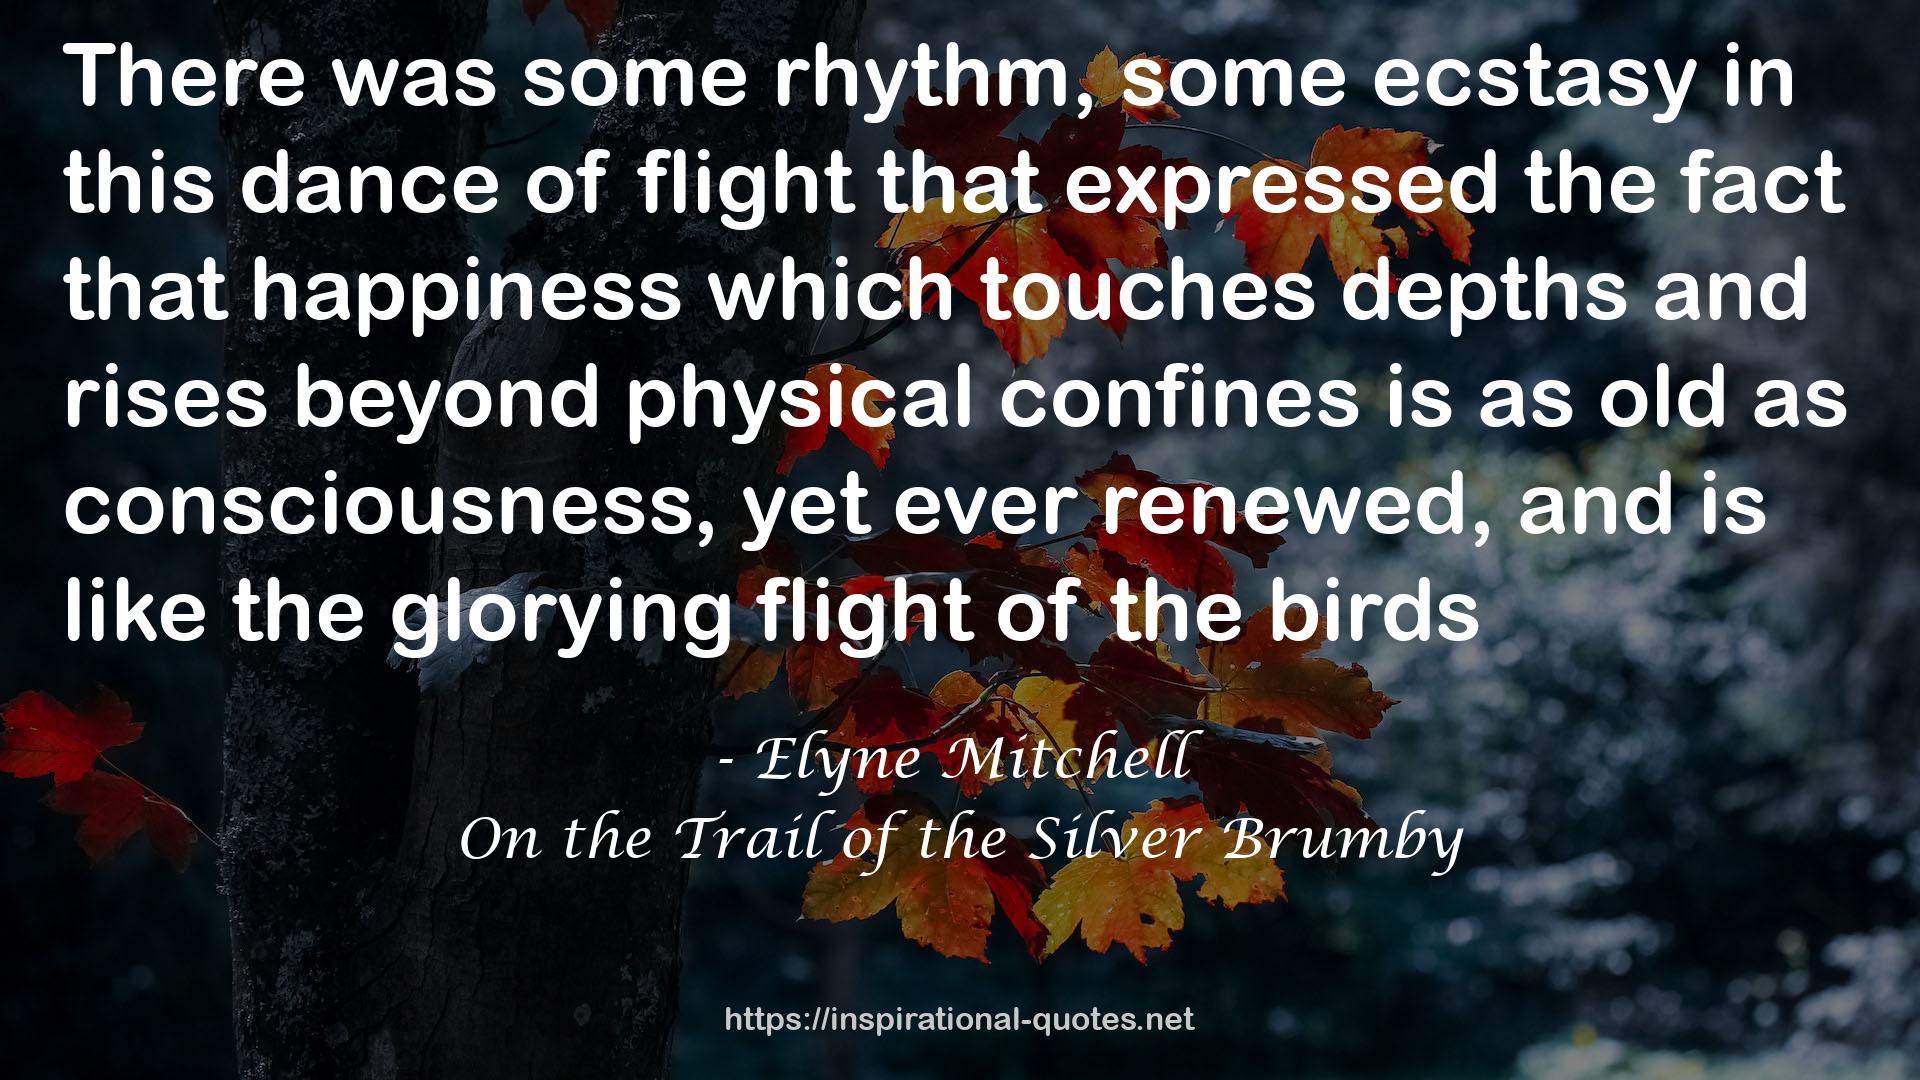 On the Trail of the Silver Brumby QUOTES